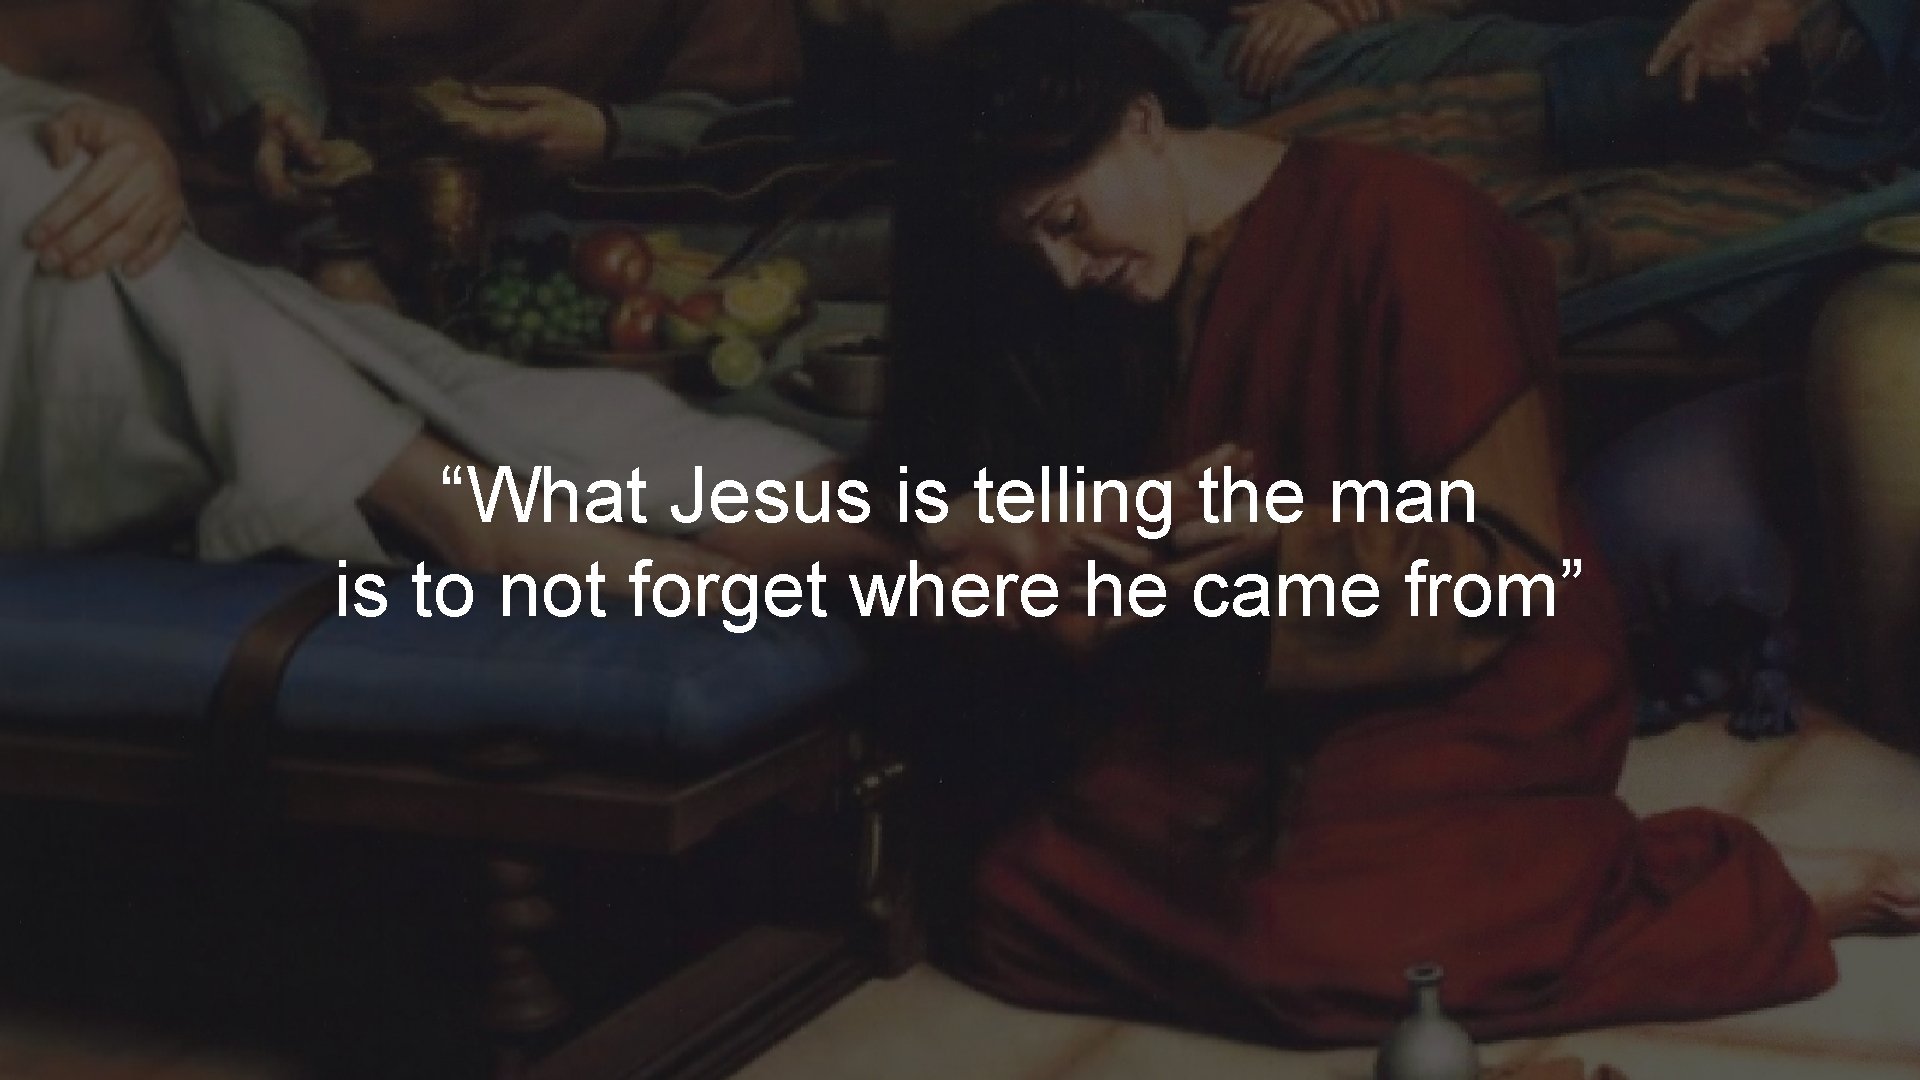 “What Jesus is telling the man is to not forget where he came from”